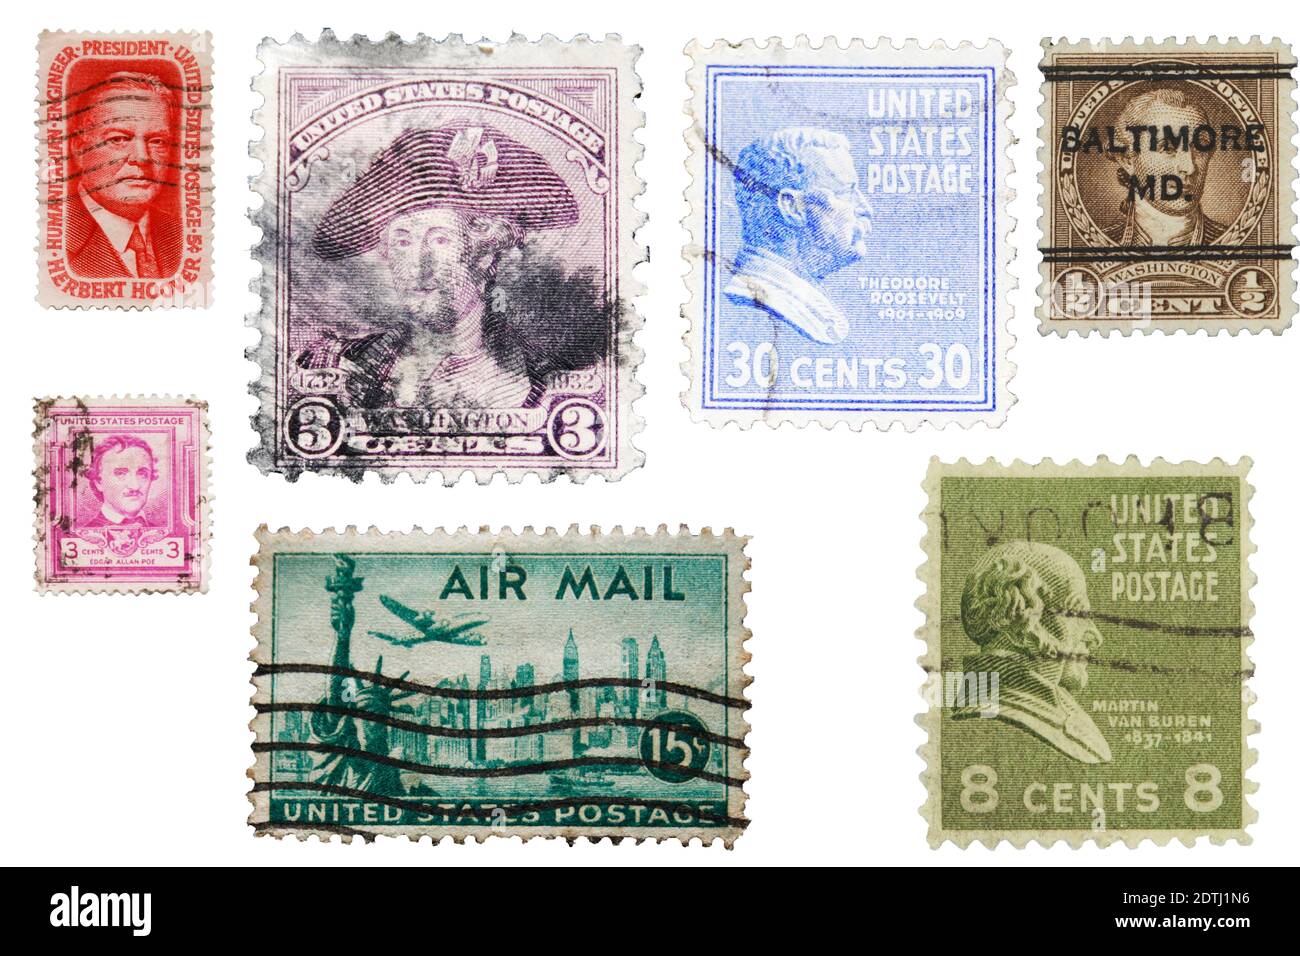 Collection of vintage US postage stamps Stock Photo